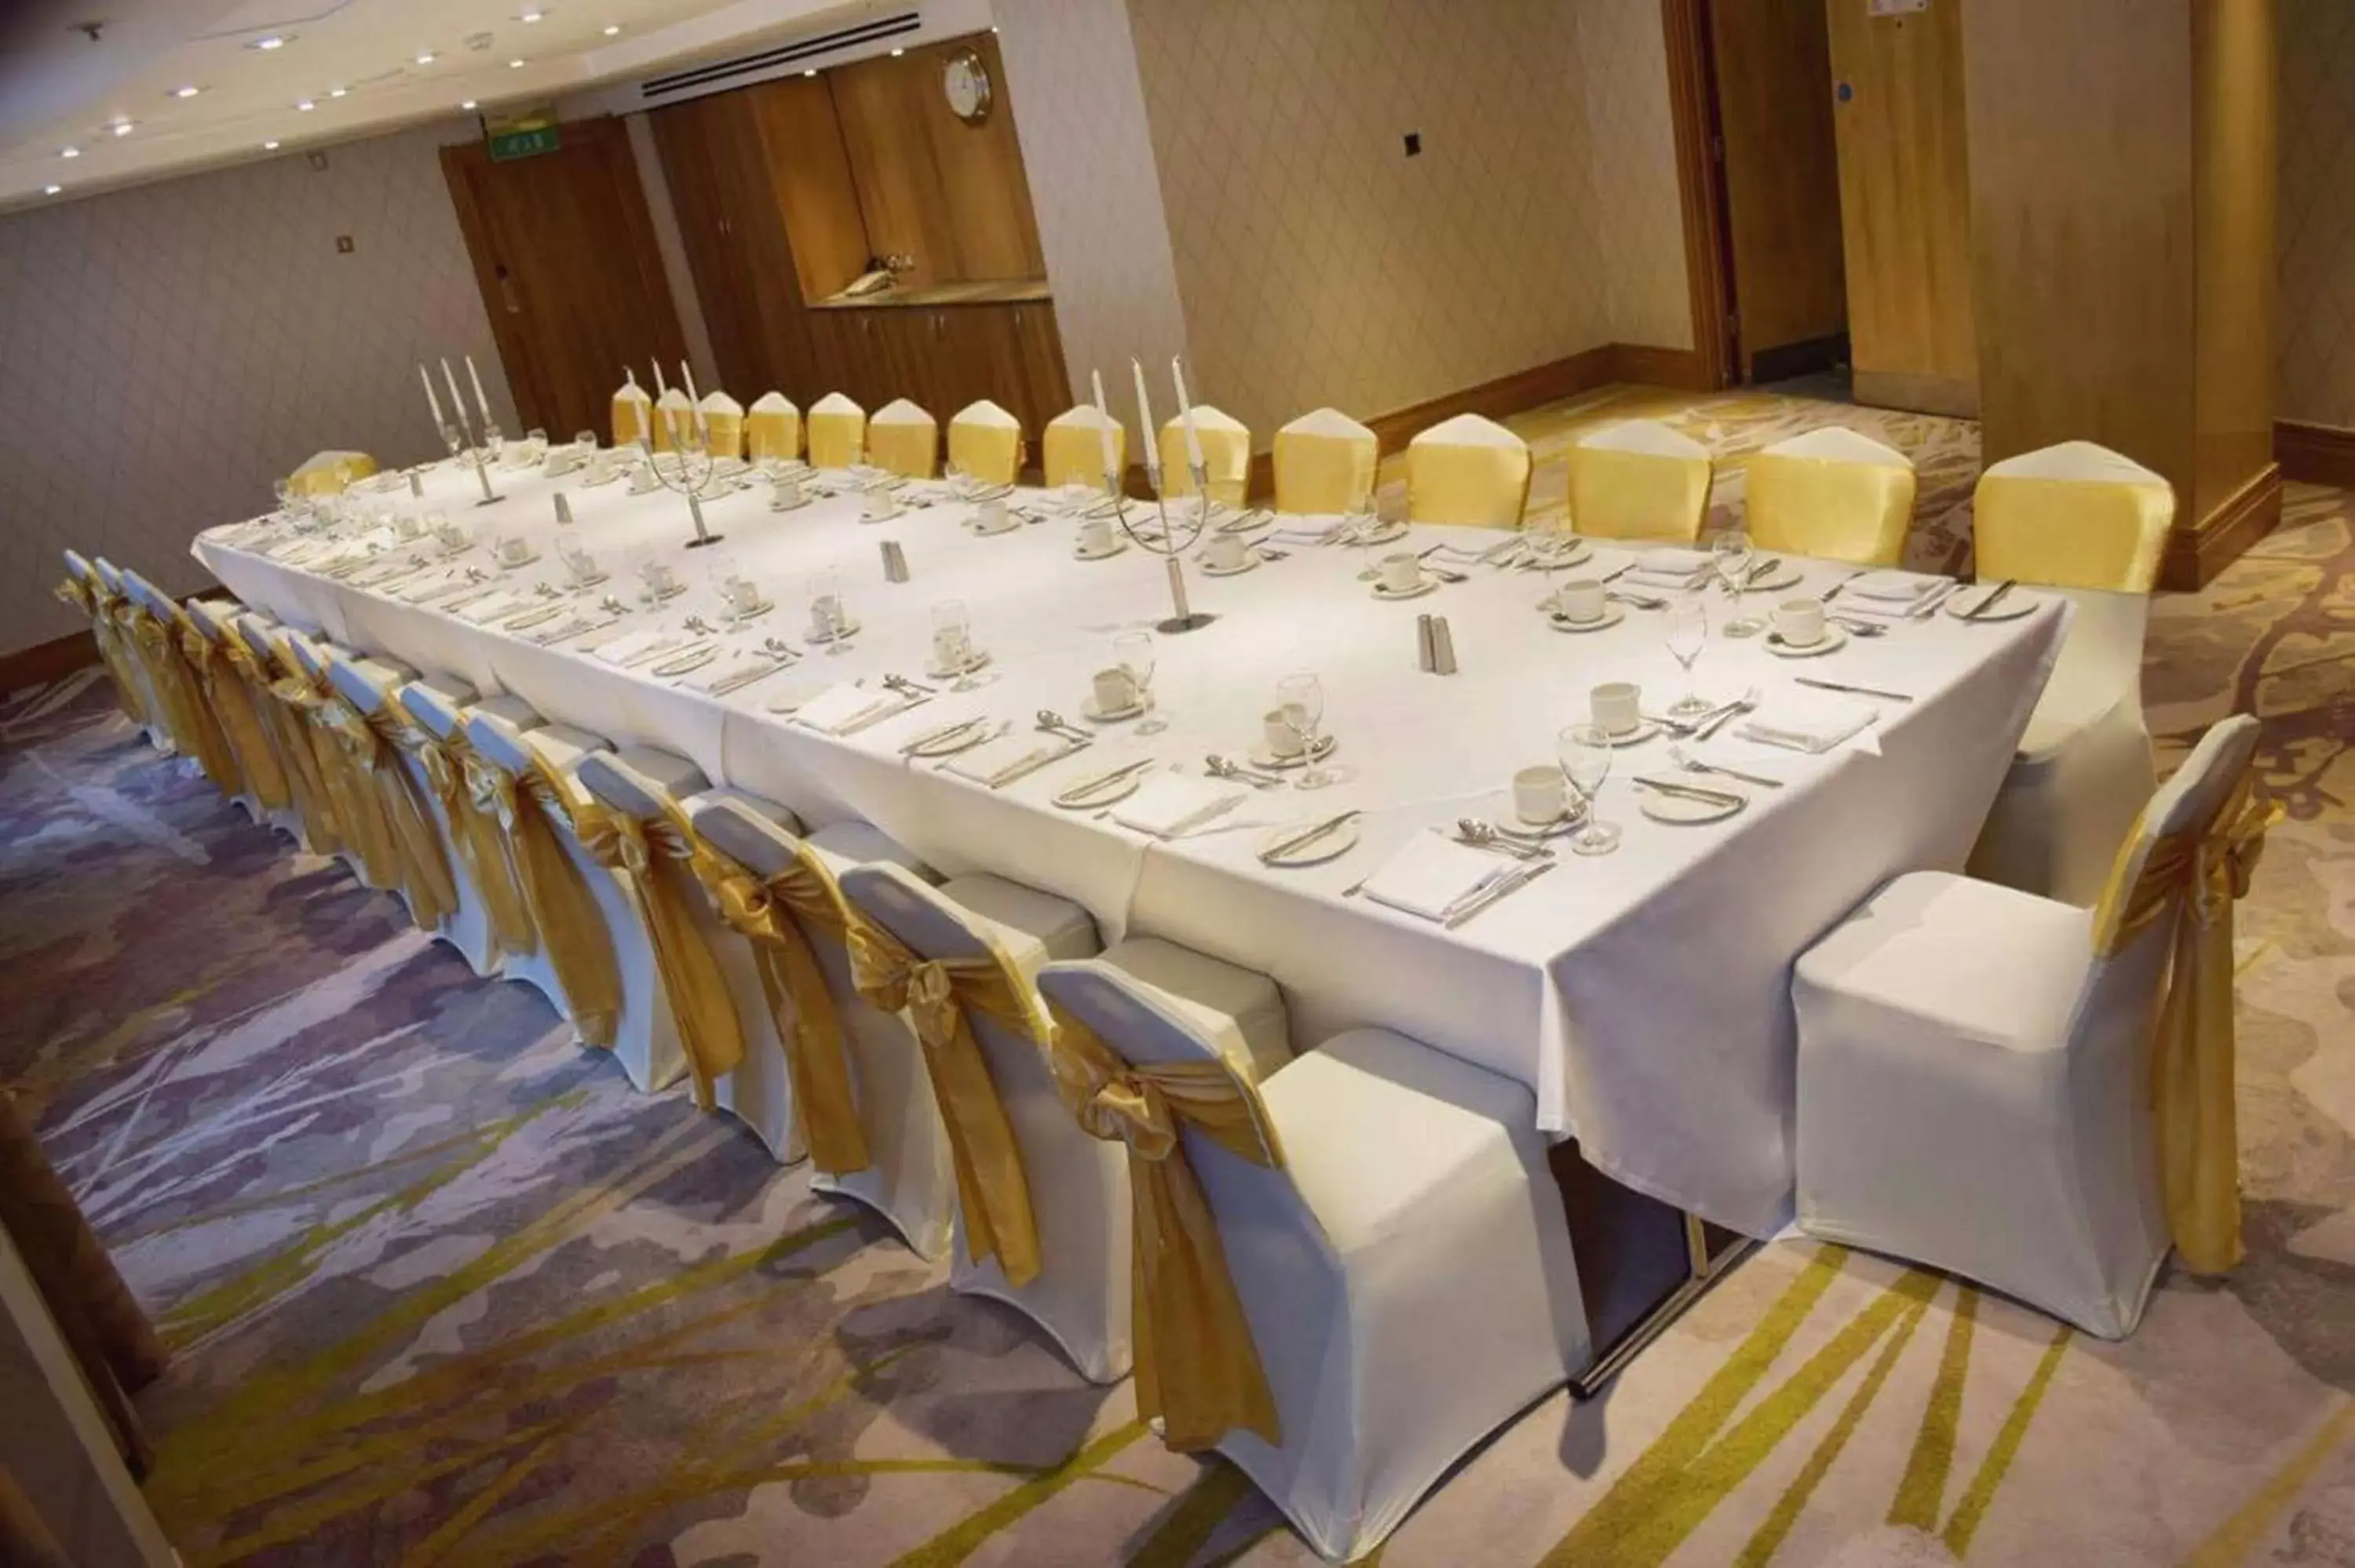 Meeting/conference room, Banquet Facilities in Hilton Cardiff